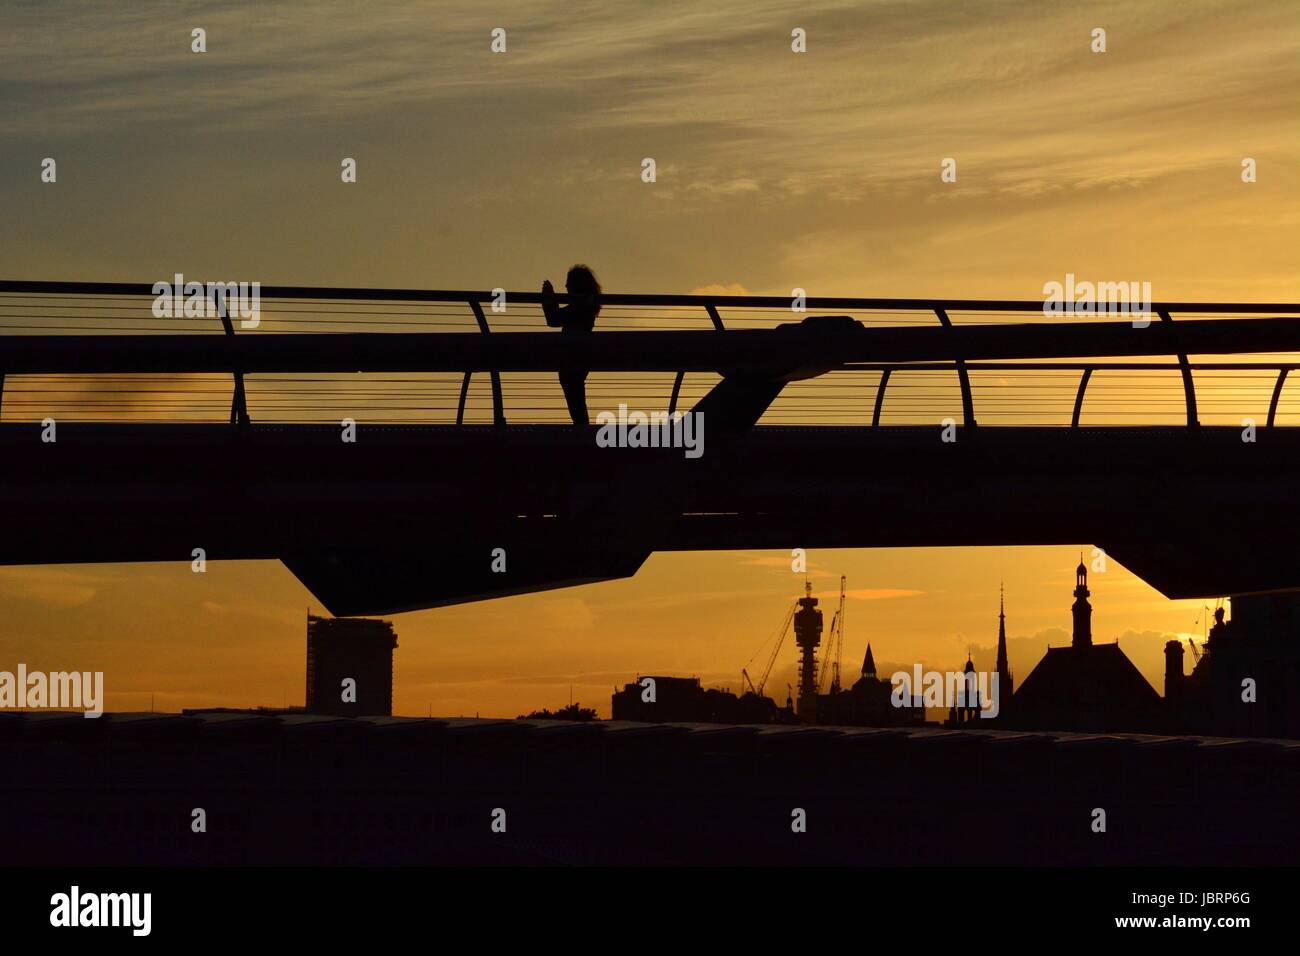 London, UK. 12th June 2017. A woman takes a photograph and is silhouetted against the sky as the sun sets behind the Millennium Bridge in London, UK. The BT tower is visible in the skyline beyond. Credit: Patricia Phillips/Alamy live news Stock Photo